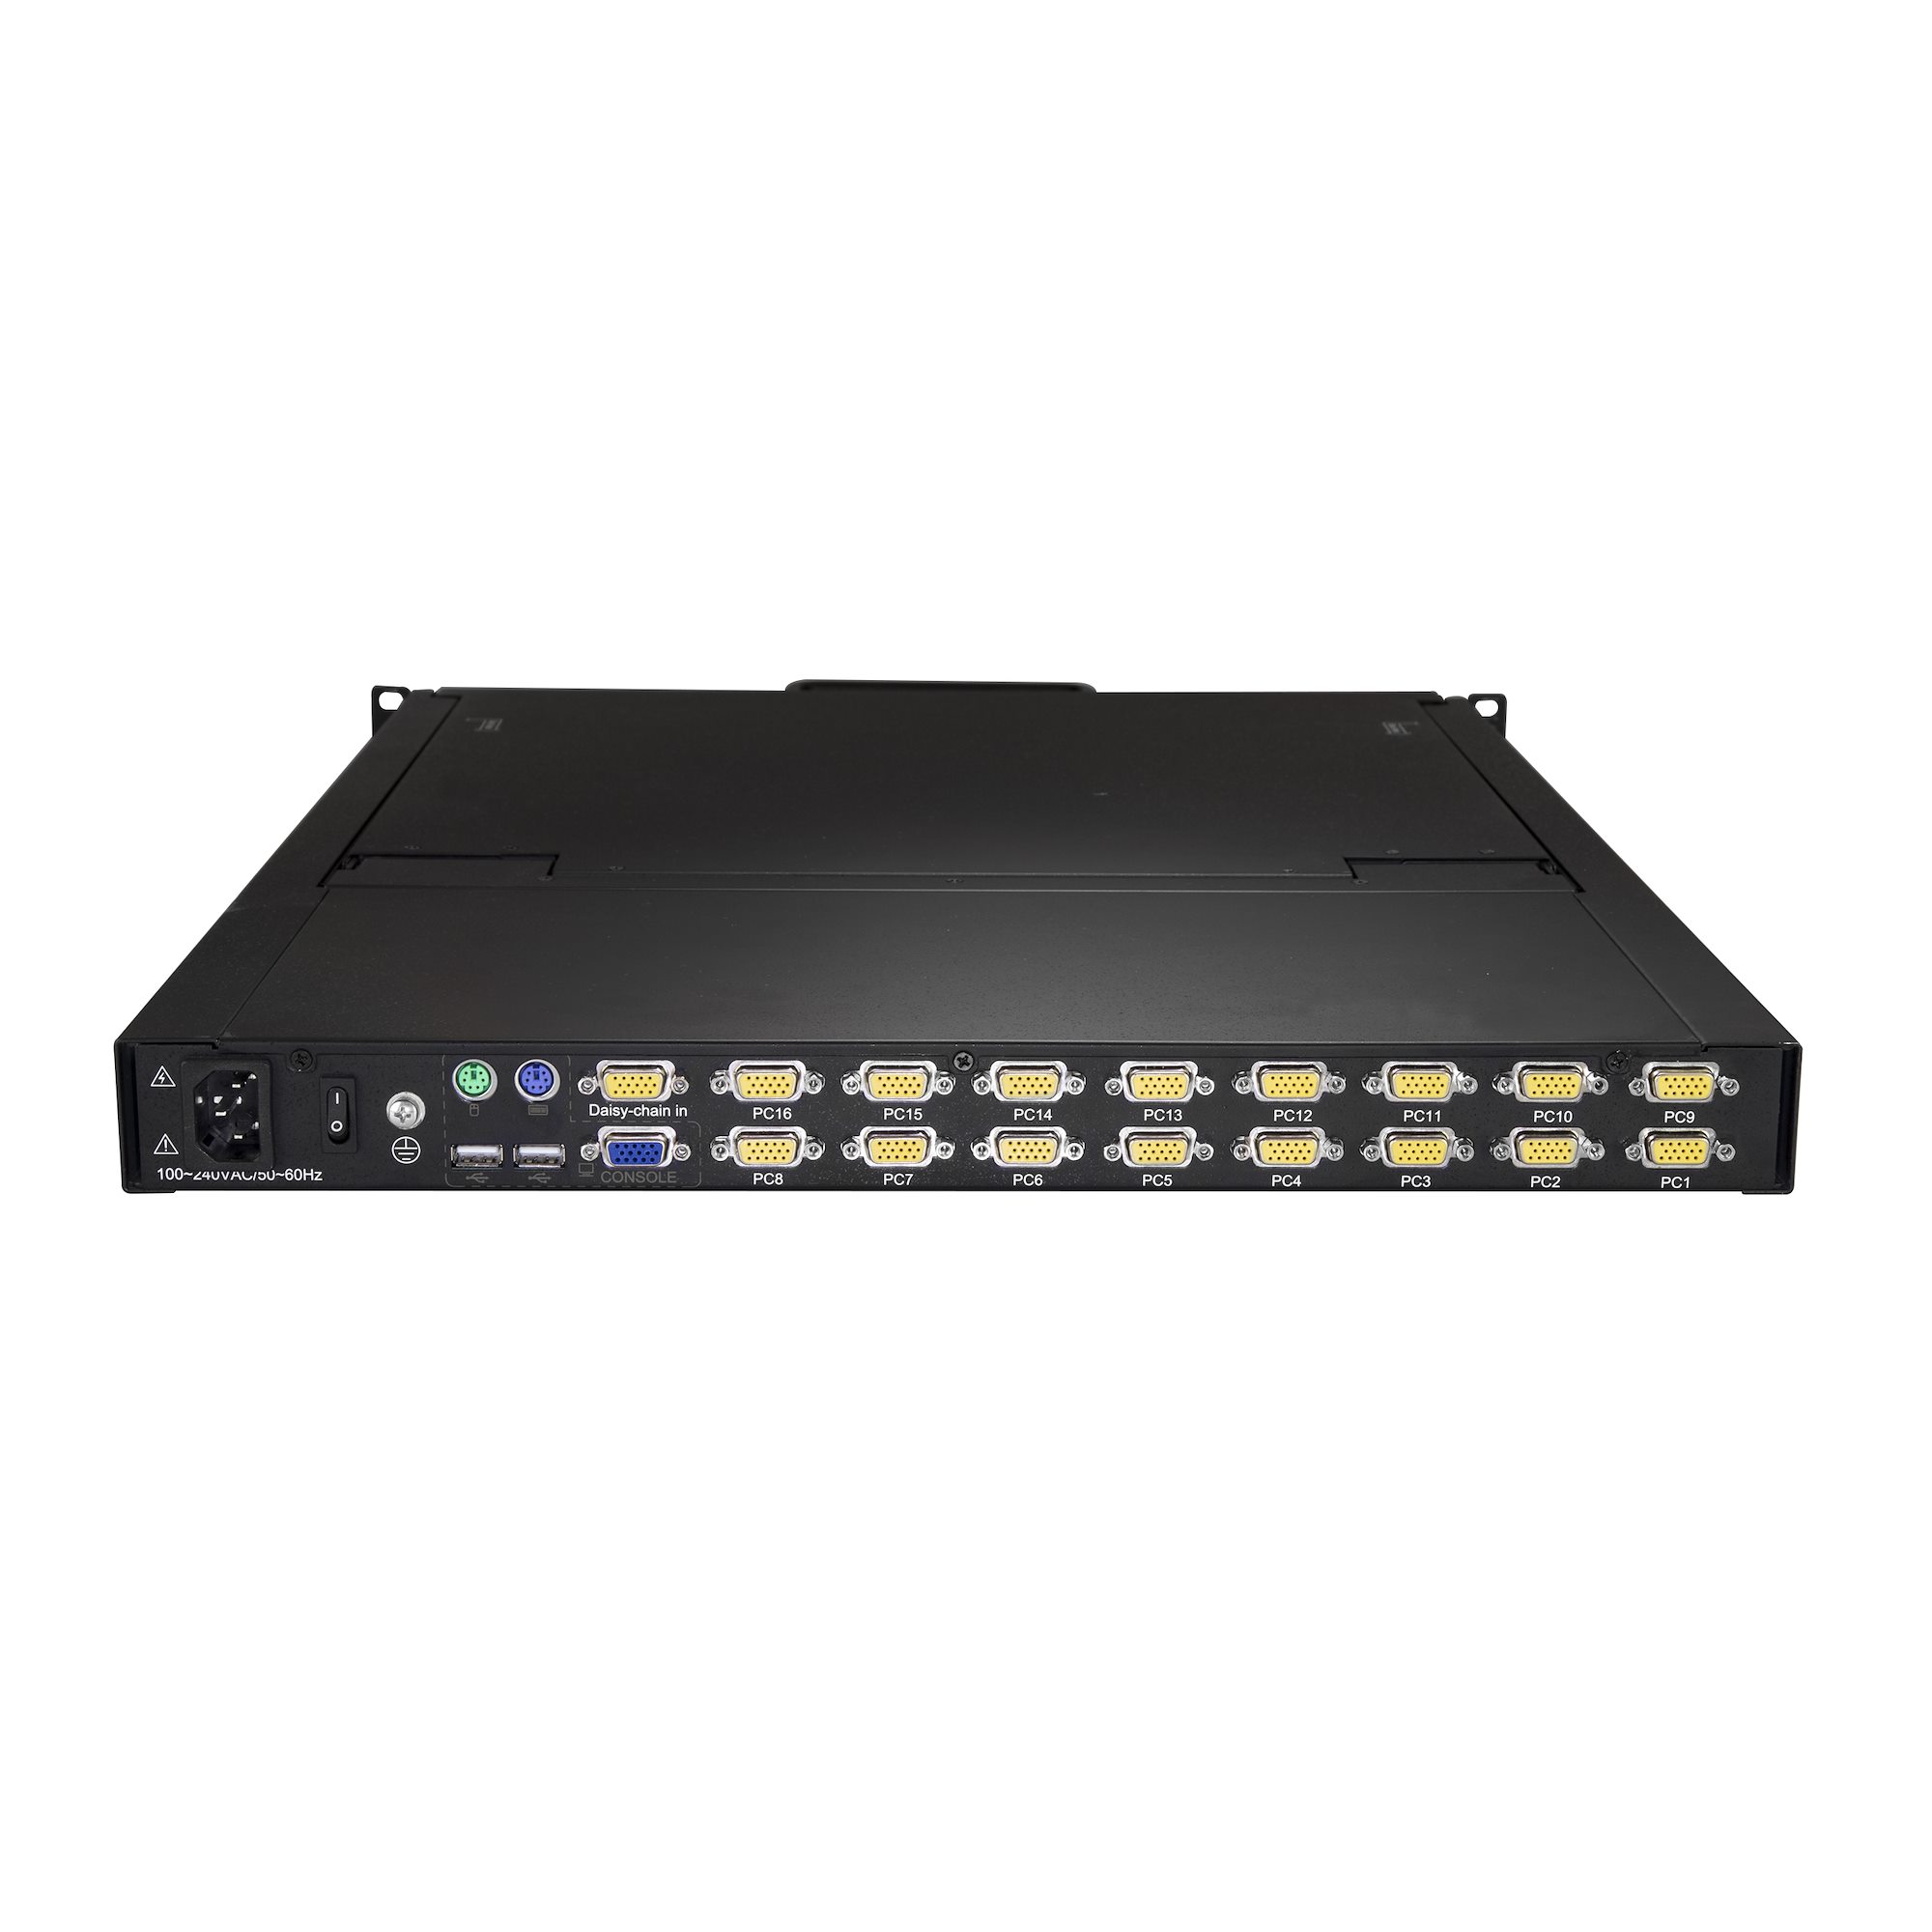 16-Port × 2 Users Cat5e/6 1U Rack-Mount USB KVM Switch with 19 LED and IP  Remote Access, 16 Interface Modules Included 